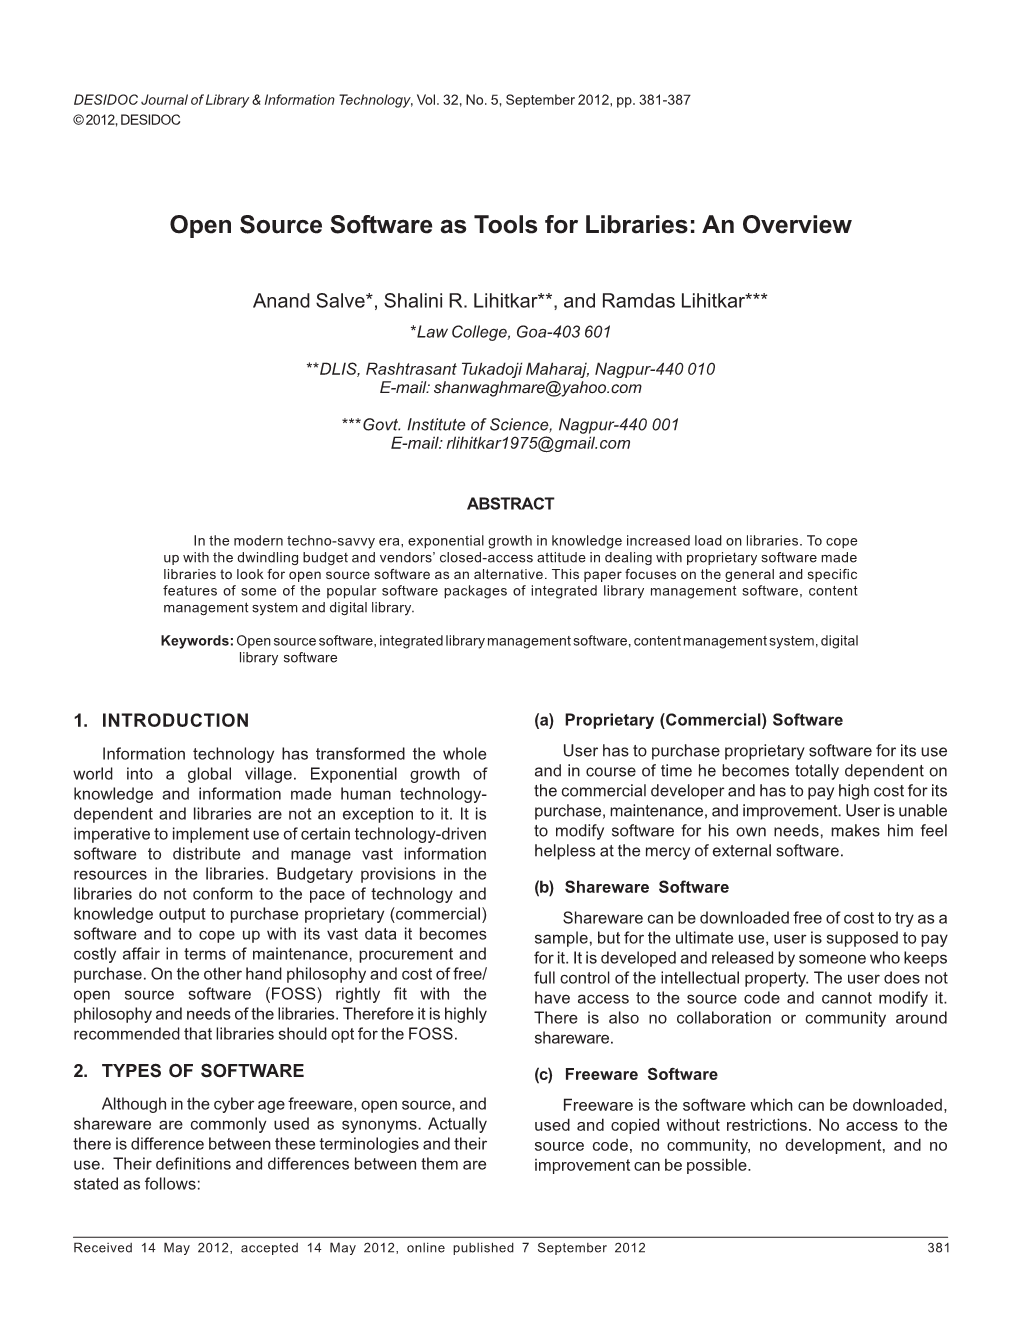 Open Source Software As Tools for Libraries: an Overview